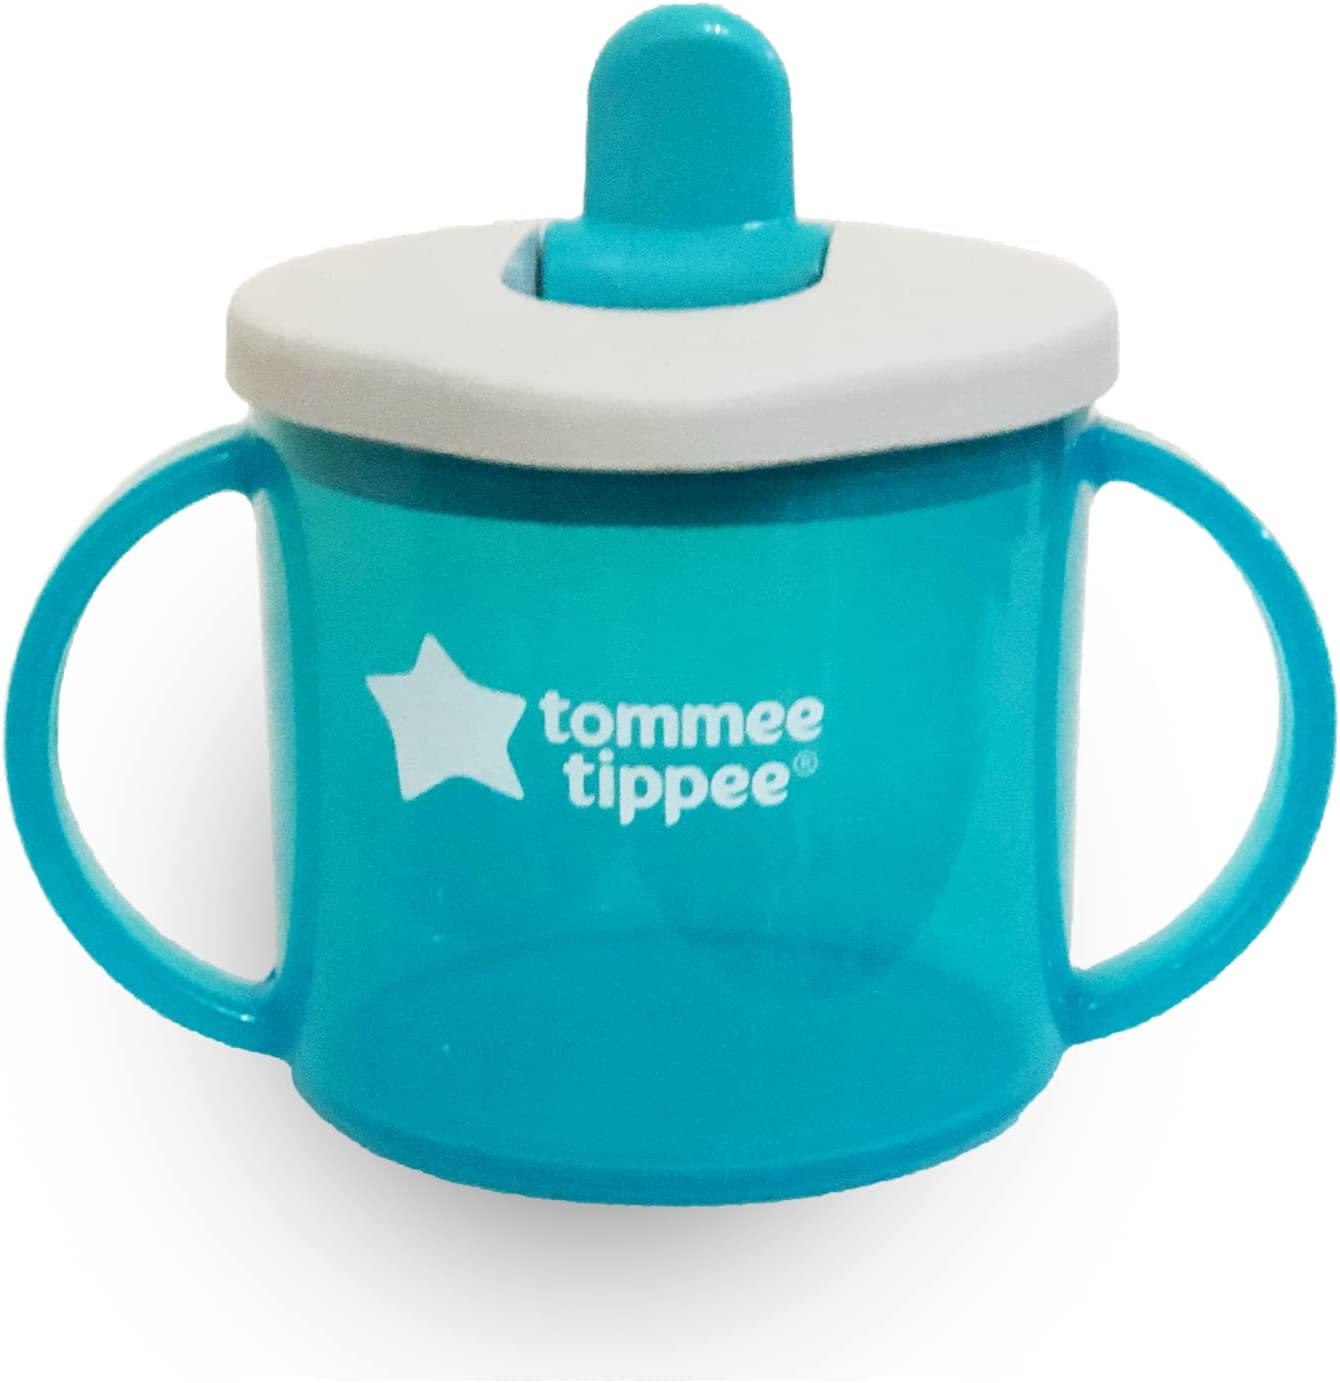 HE102199 - Tommee Tippee Twist and Click Nappy Disposal Refill